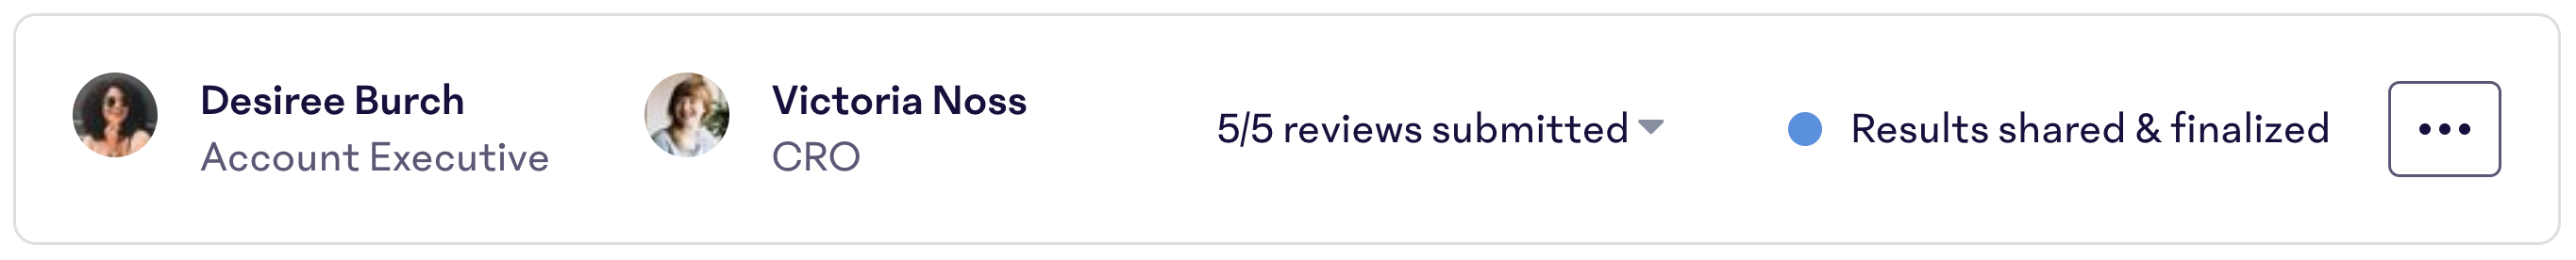 OpenReviewResults.png